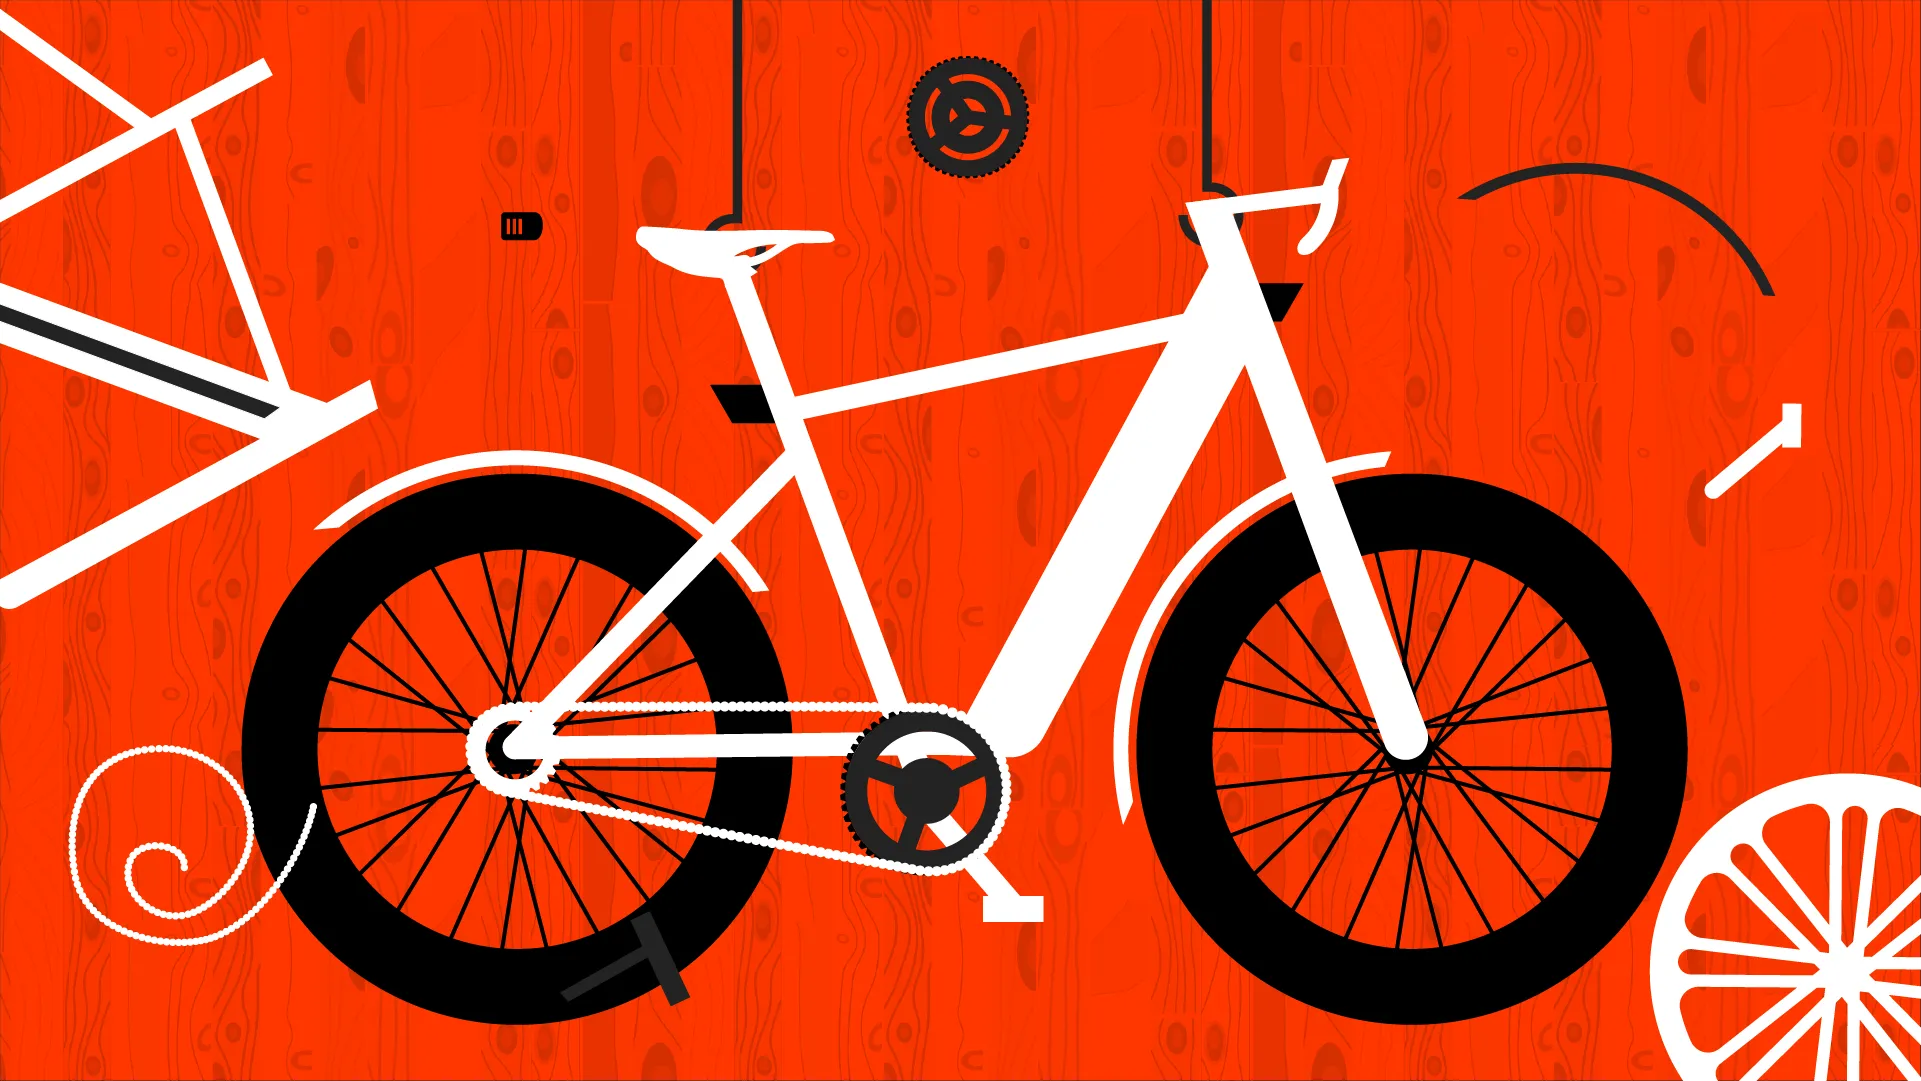 Illustration of a Belgian bicycle for APBC